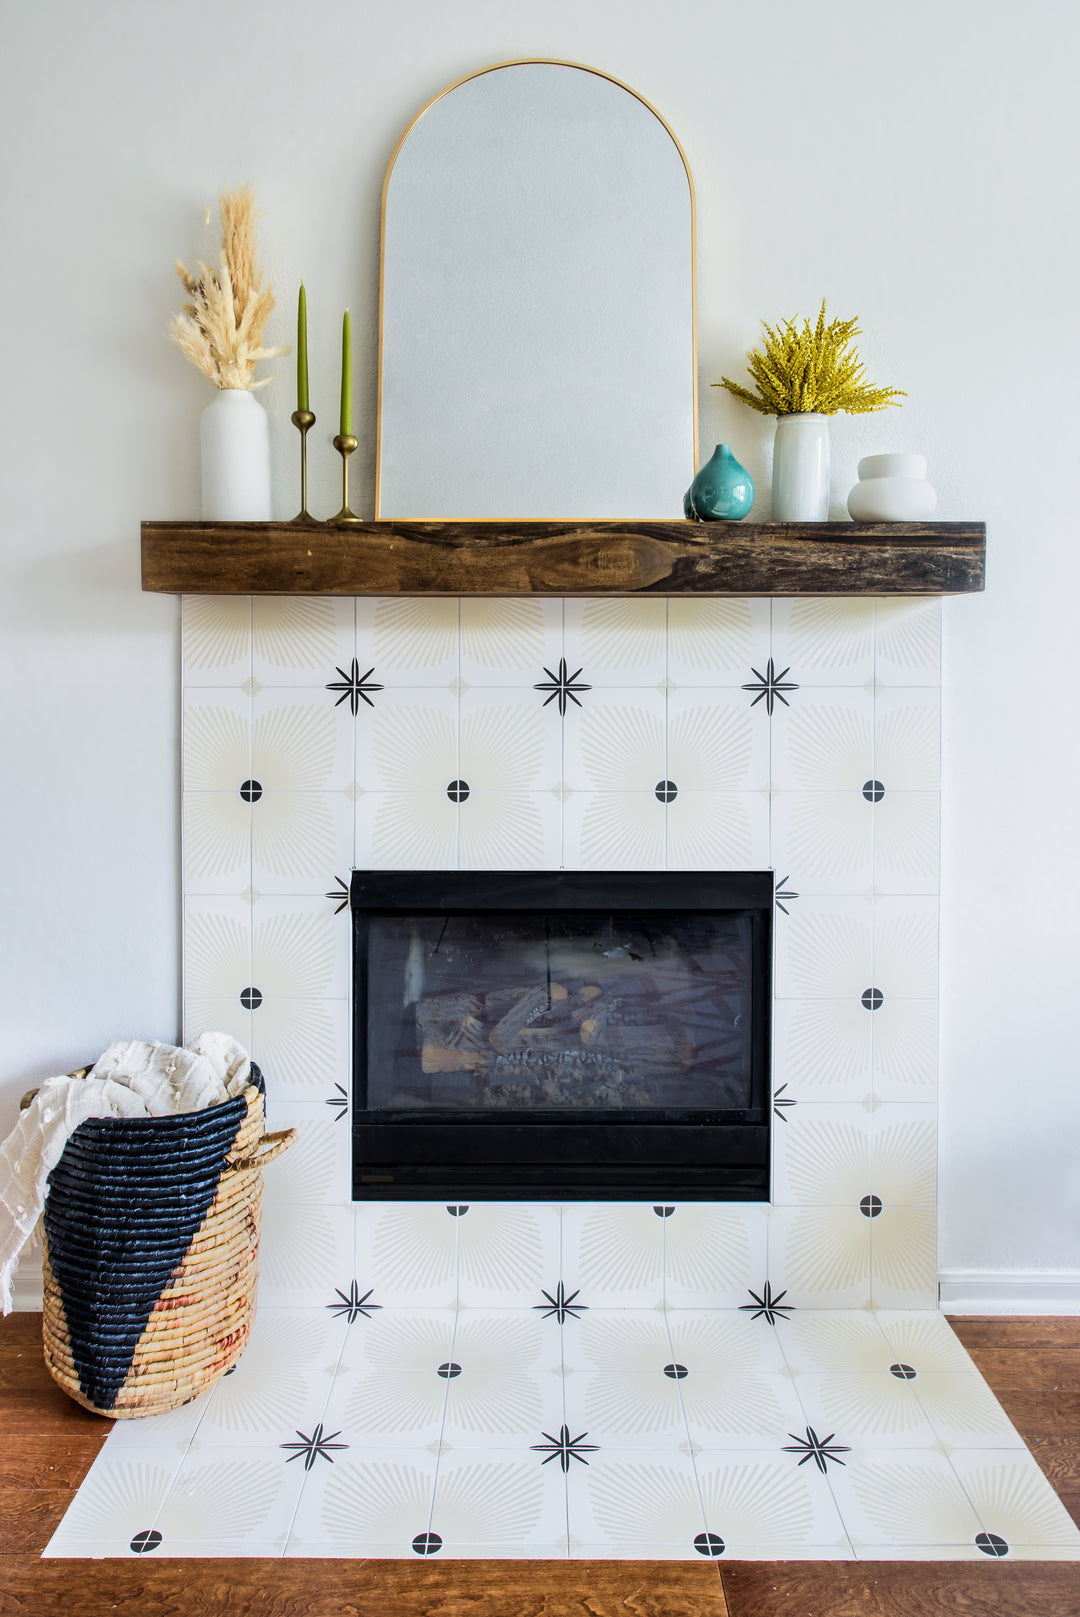 Modern fireplace design with white and black tiles